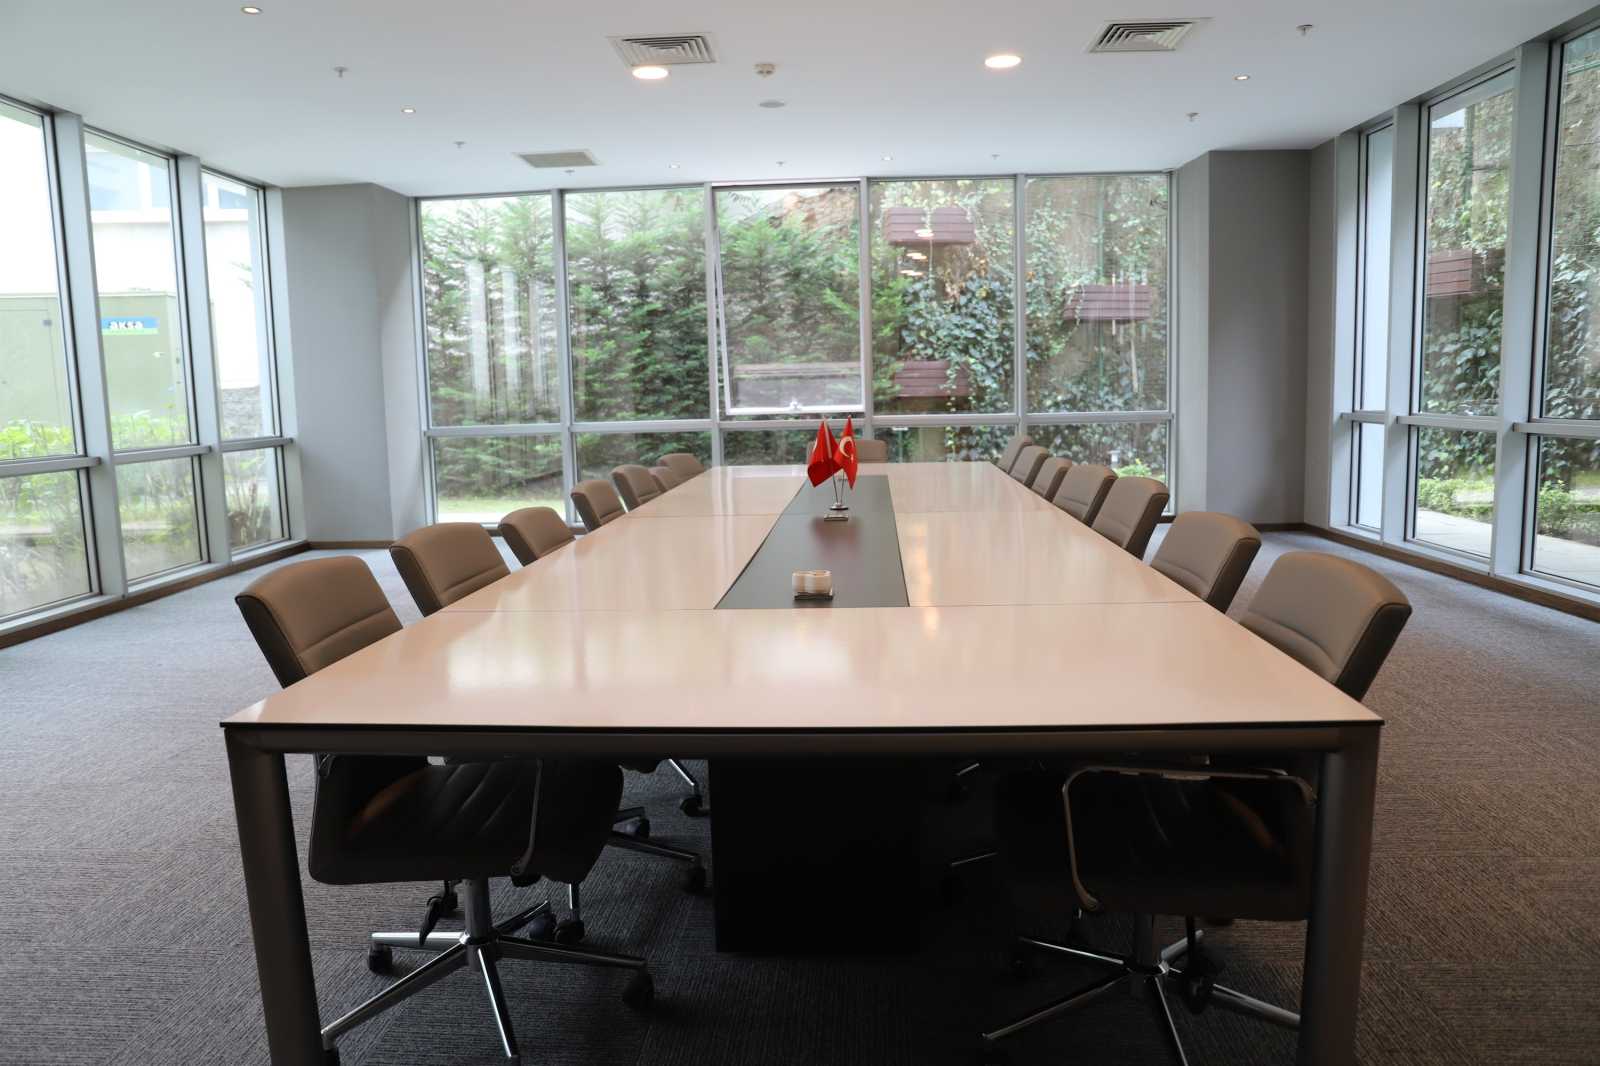 Offices & Shops - Istanbul City Centre - Meeting rooms